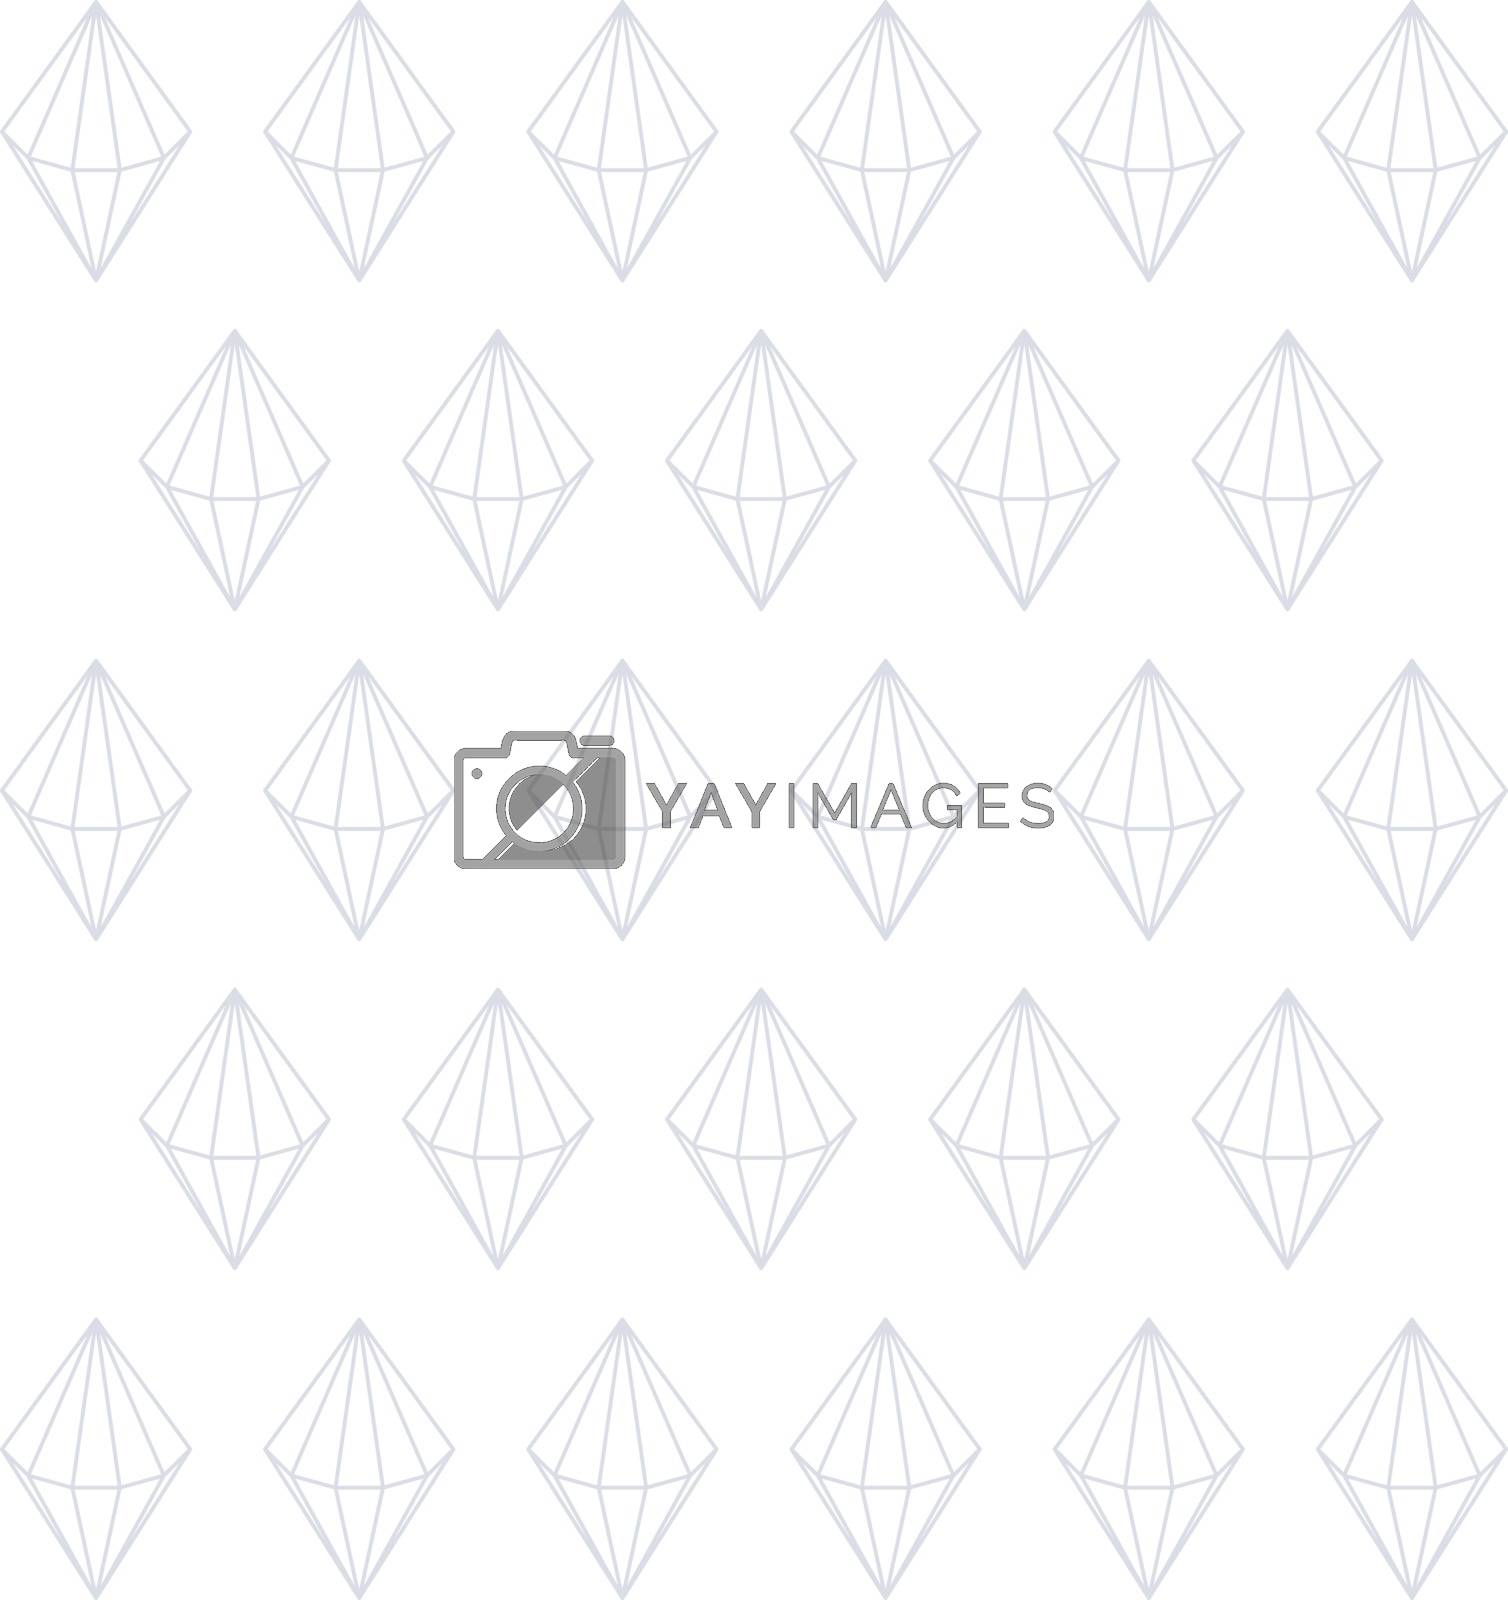 Royalty free image of diamond gemstone by vector1st